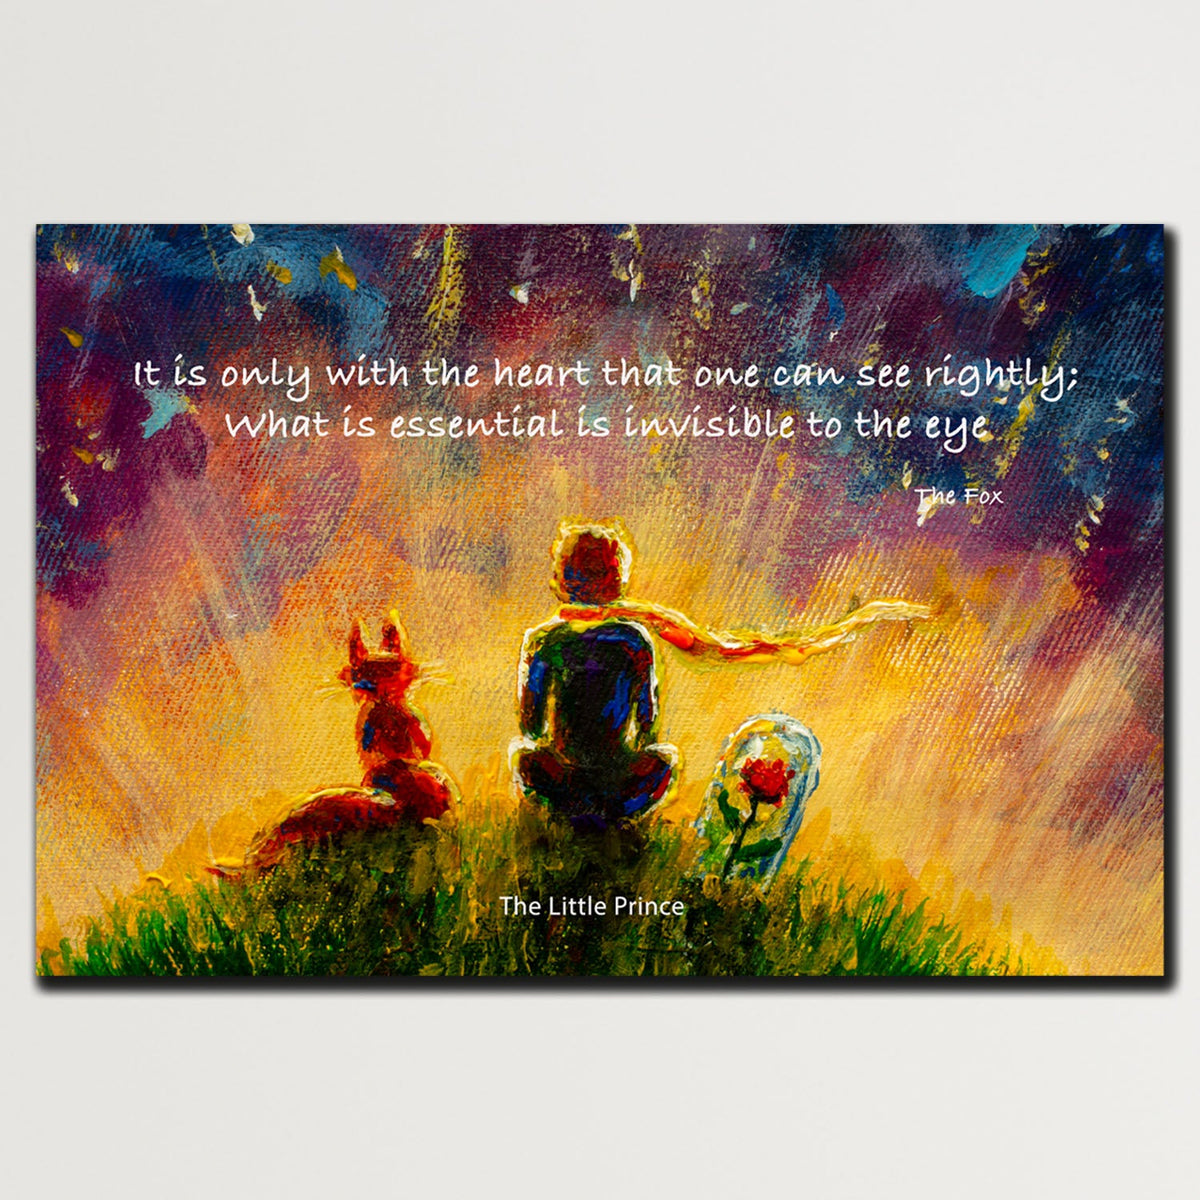 https://cdn.shopify.com/s/files/1/0387/9986/8044/products/TheLittlePrinceWithFoxandRoseCanvasArtprintStretched-Plain.jpg